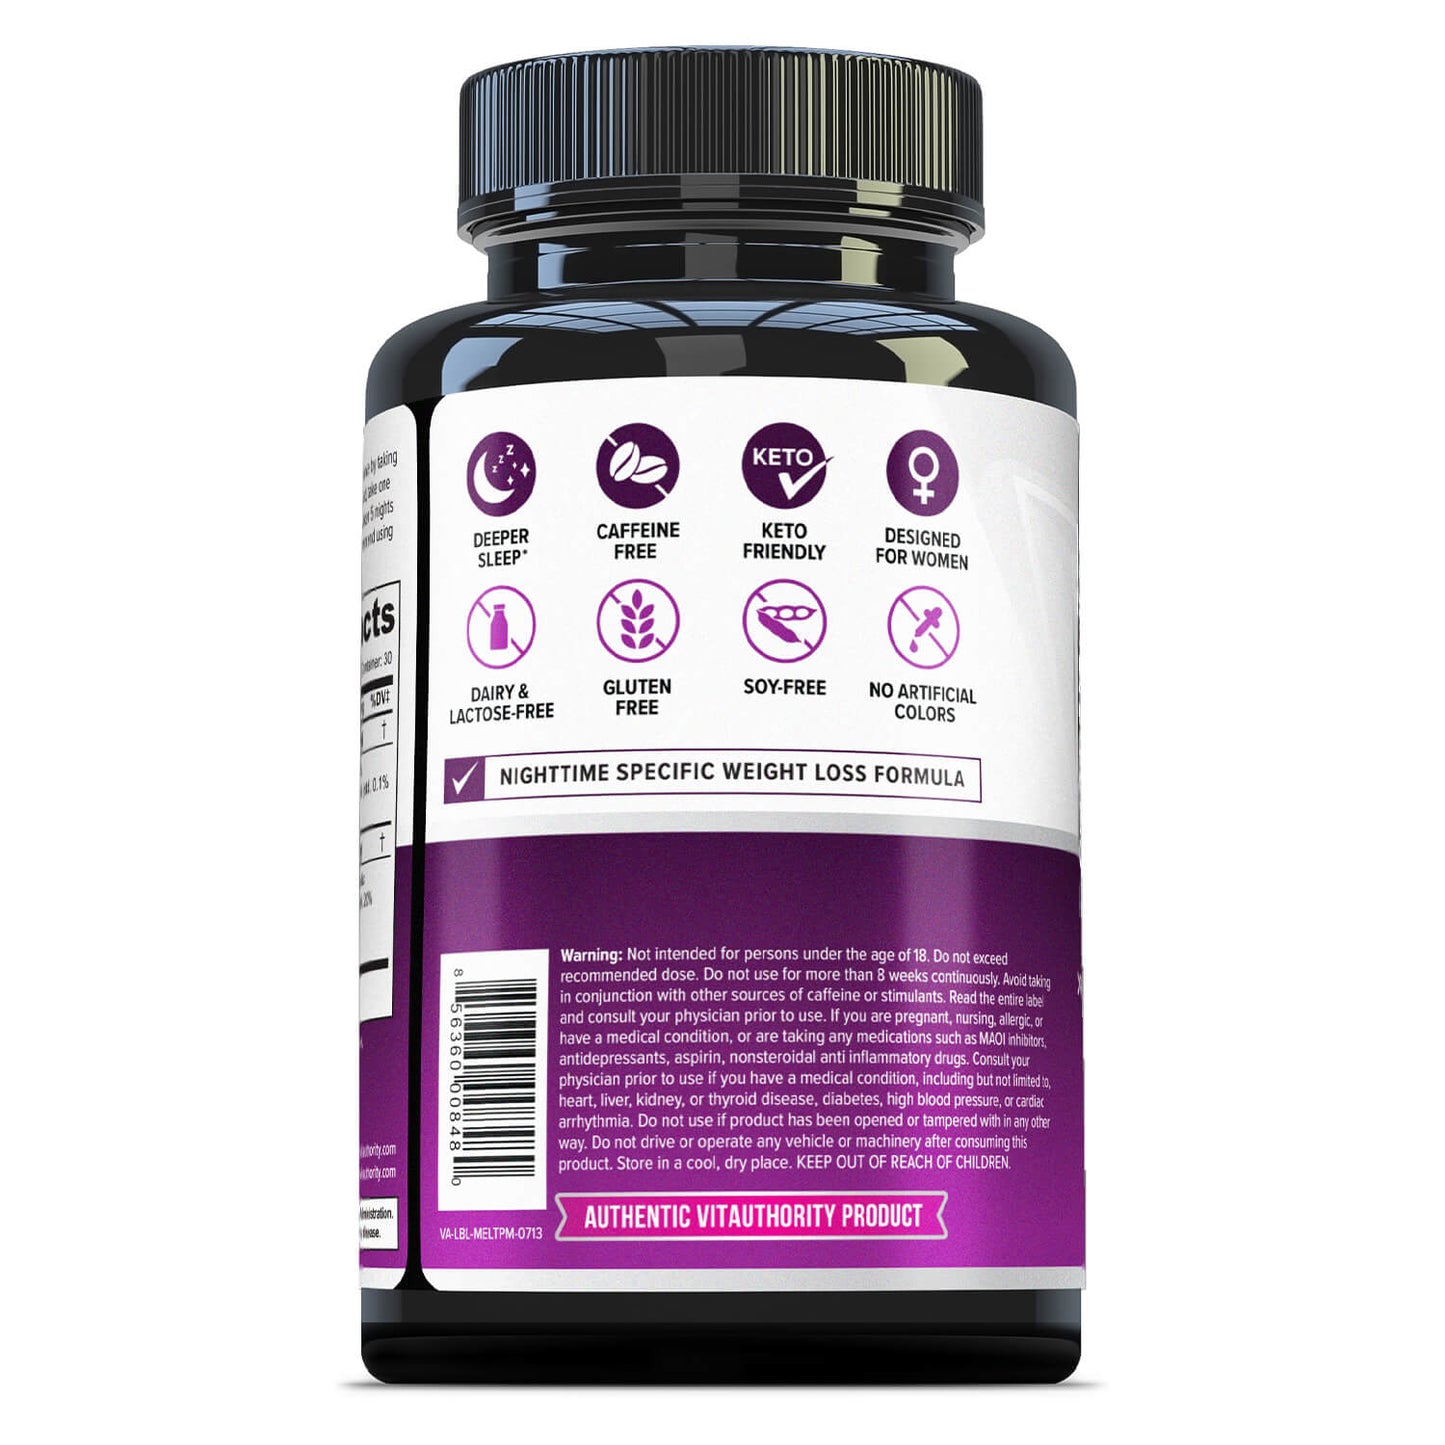 Melt PM - Metabolism Supporting Sleep Aid